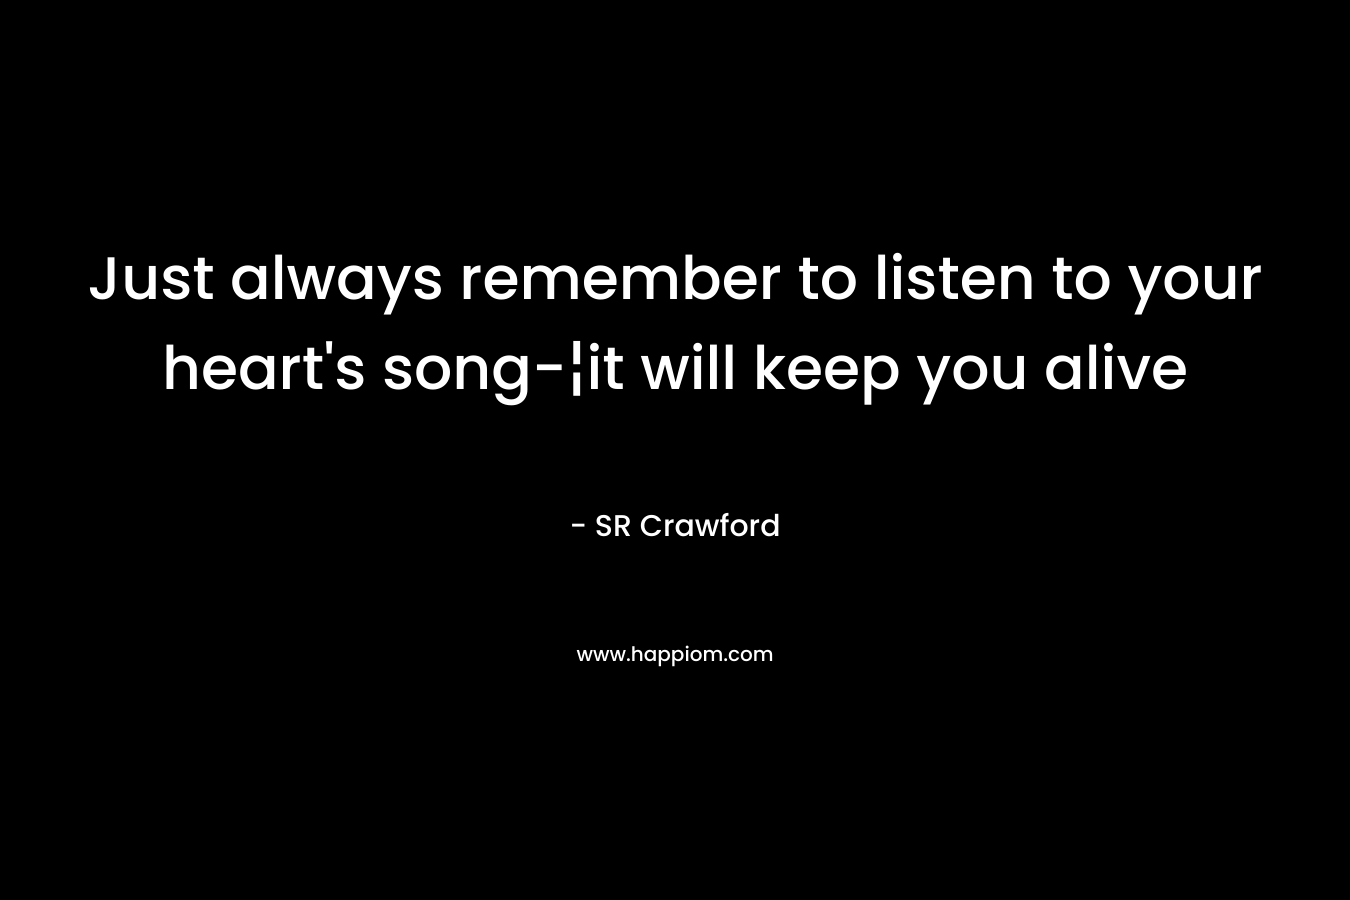 Just always remember to listen to your heart's song-¦it will keep you alive